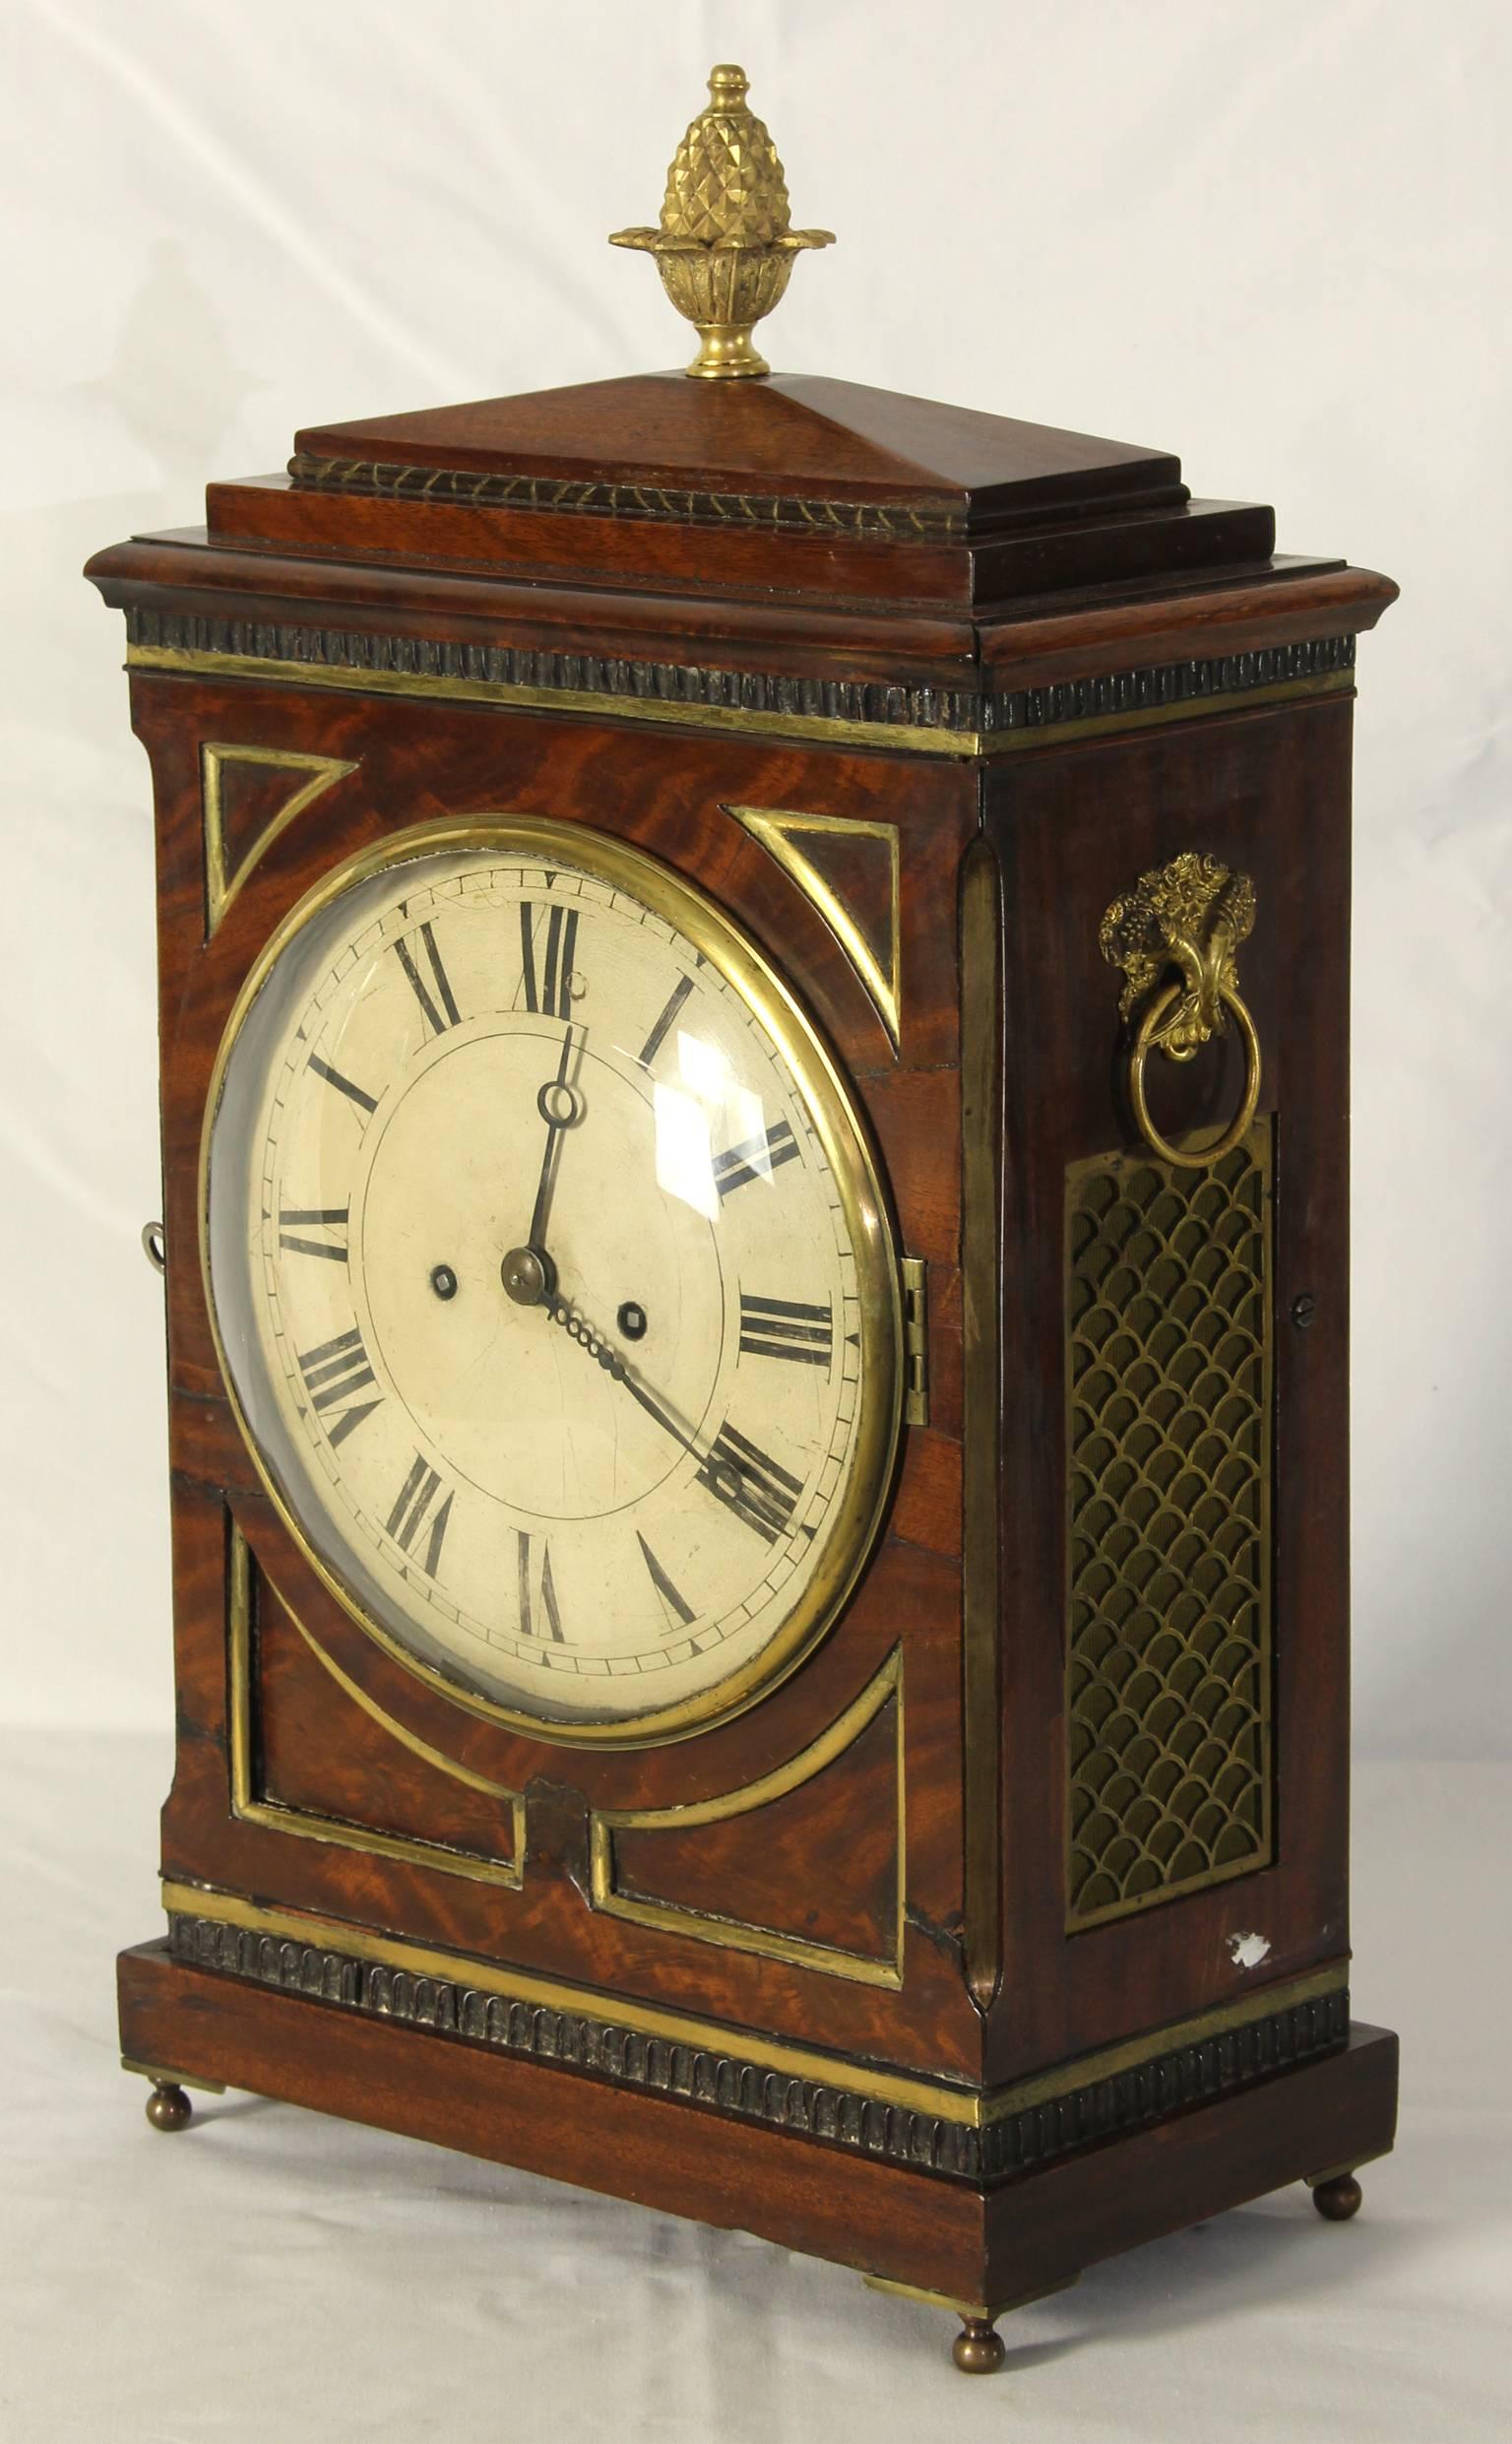 An elegant English Regency (circa 1815) 8-day mahogany and brass inlay mantel clock with chamfer top and gilt bronze finial.